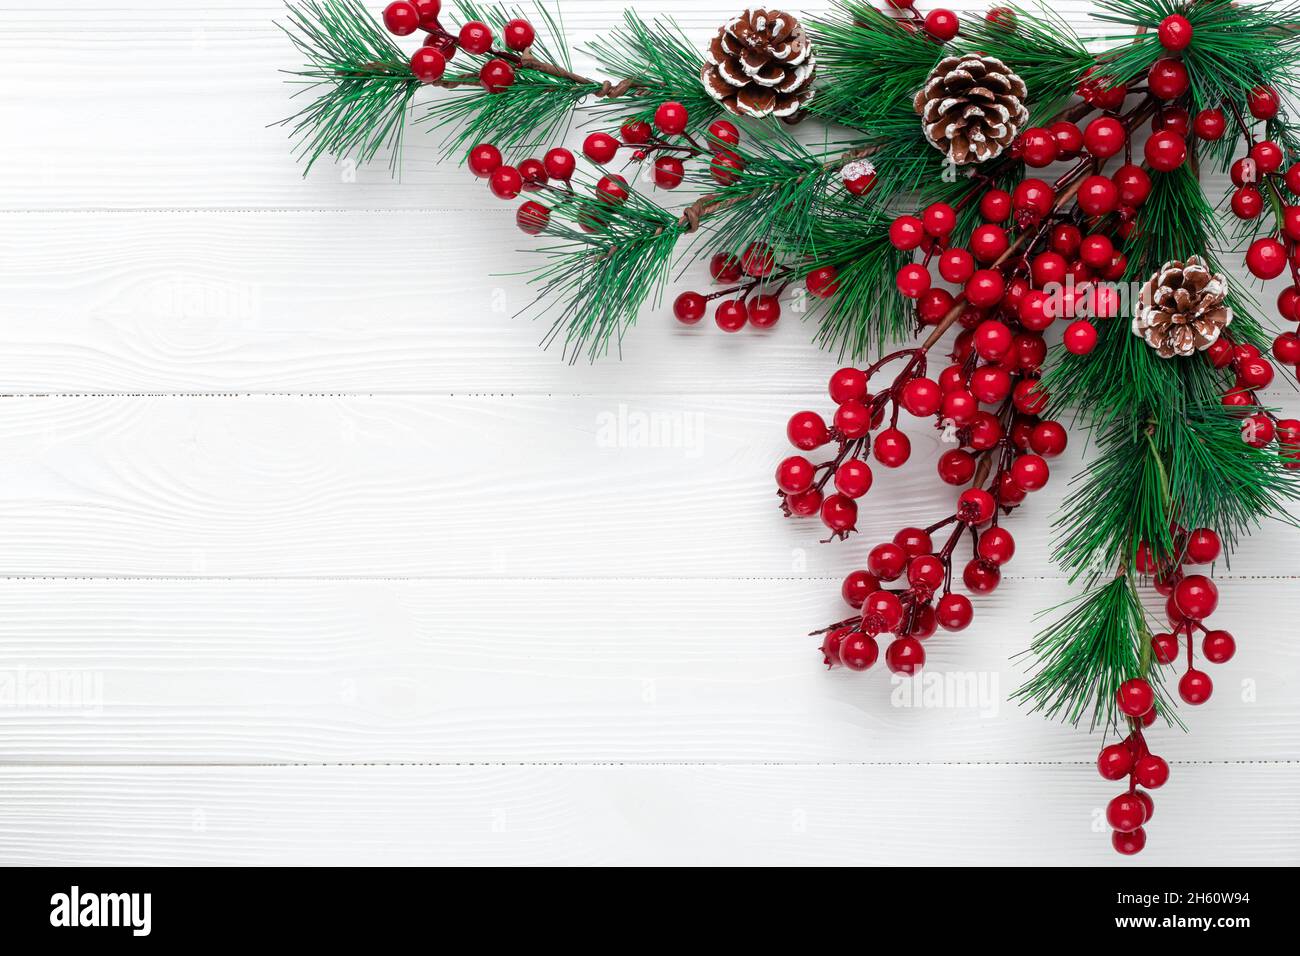 Christmas background with fir branches, cones and red holly berries. New year festive wreath of pine branches. Template, copy space. Empty place for t Stock Photo